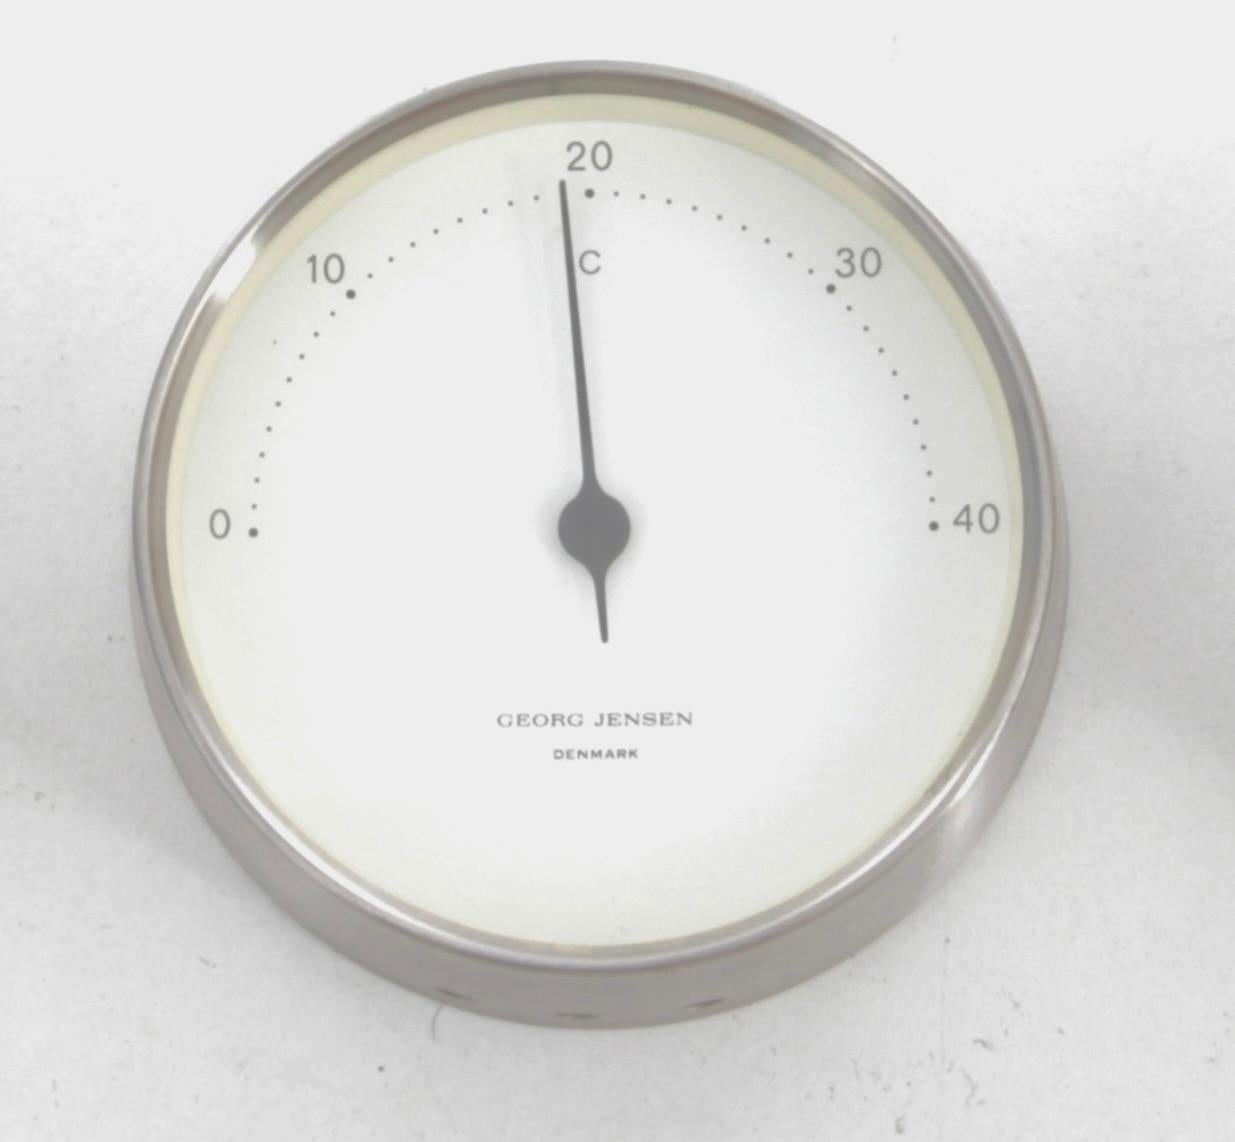 Weather station barometer, thermometer, hygrometer by Henning Koppel for Georg Jensen. Edition from the 70's. Perfect functional condition. 

